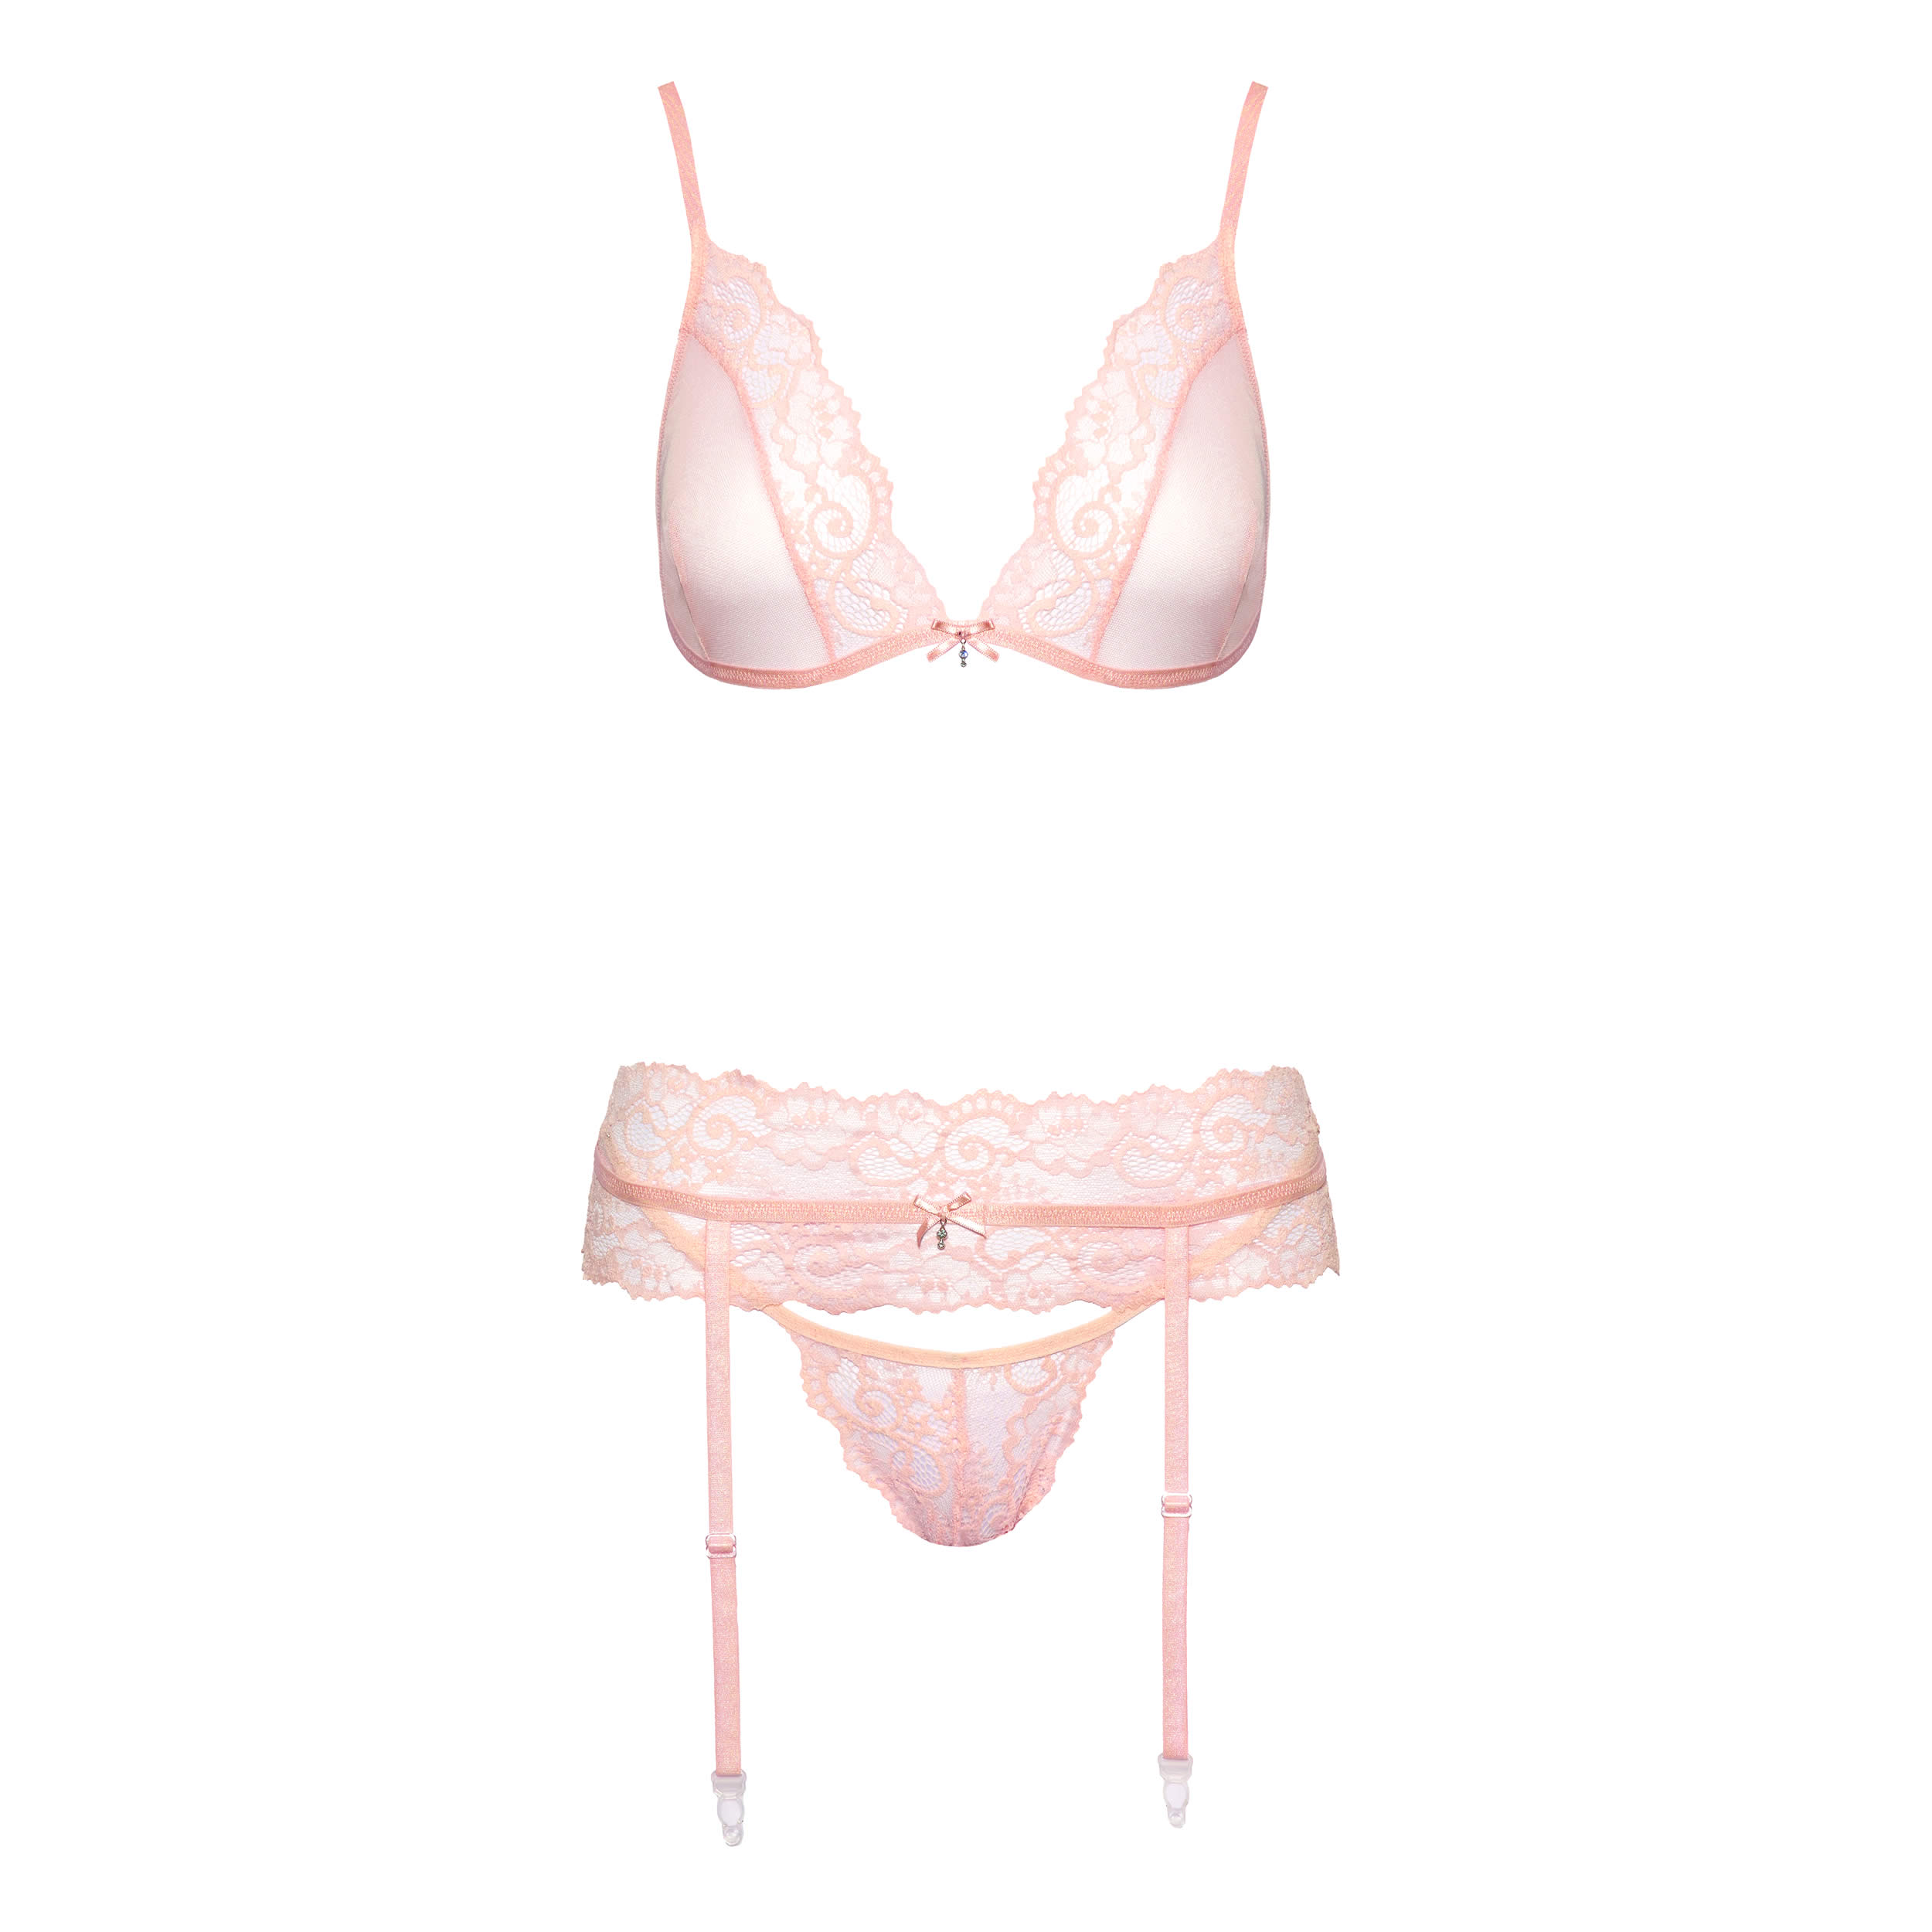 Kissable Lingerie Set in Rose with Lace Borders